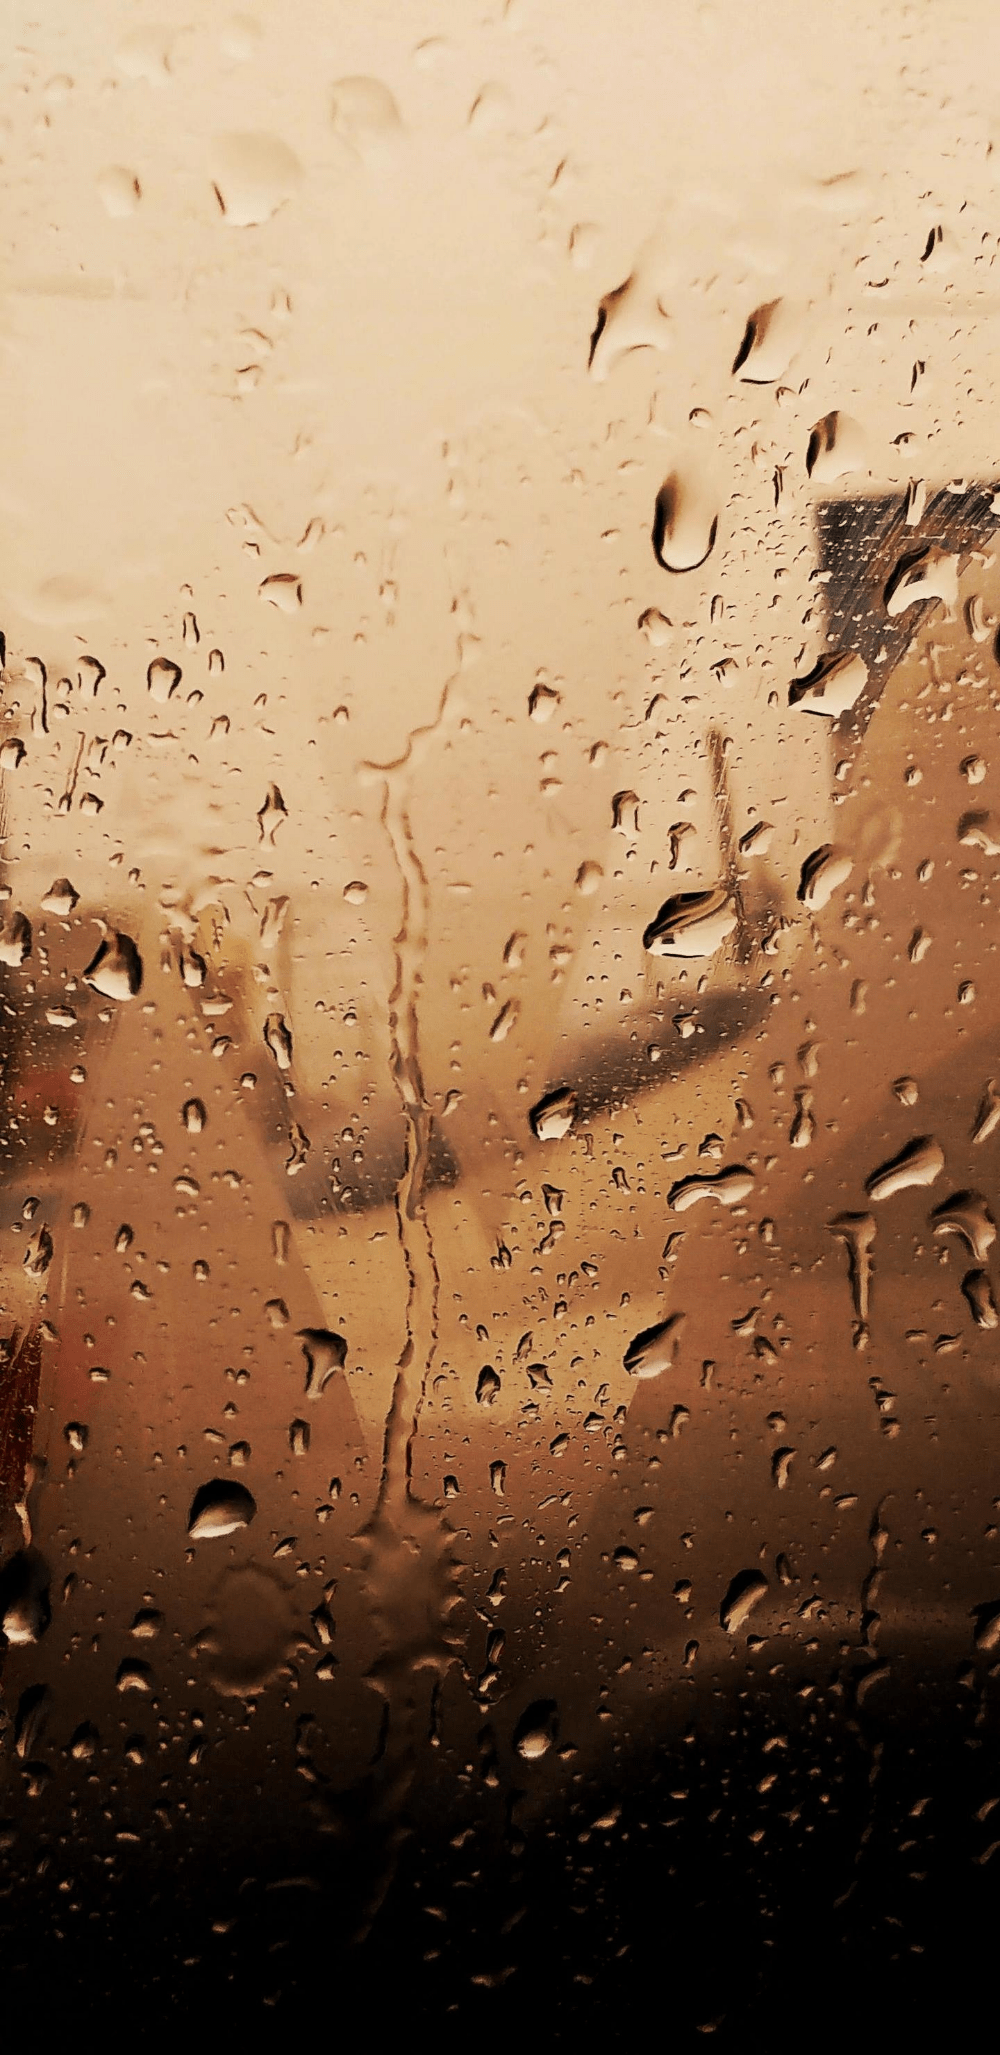 A photo of raindrops on a window with a brown background - Rain